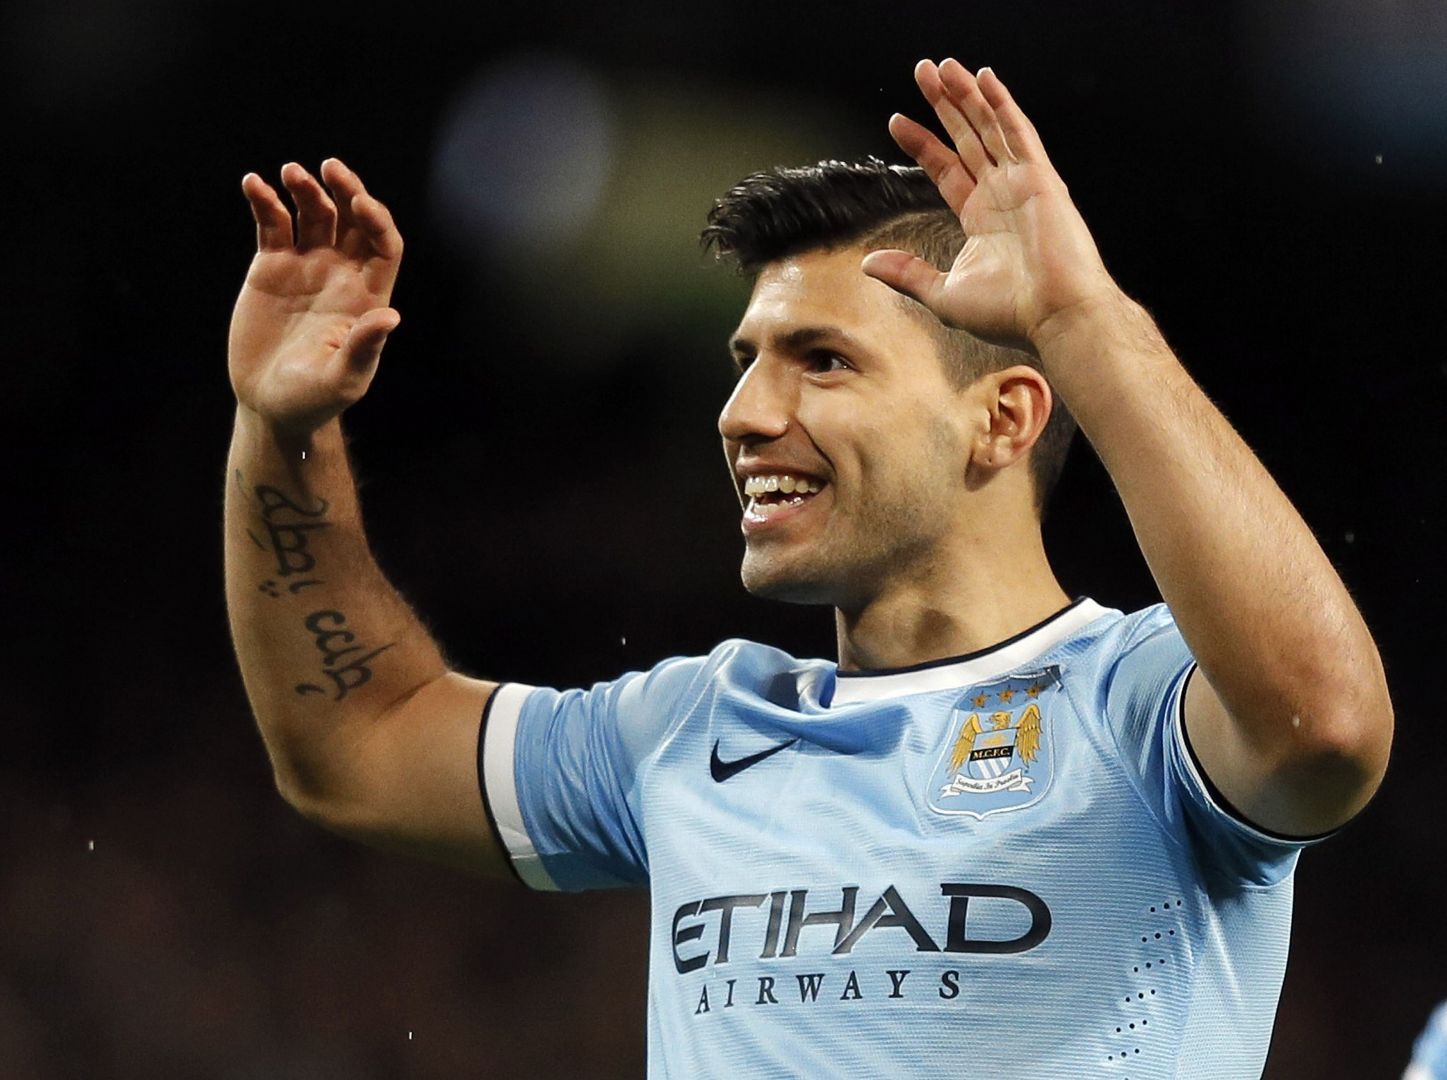 Manchester City F.C. forward Sergio Aguero has signed a new five-year deal with the English Premier League champions.